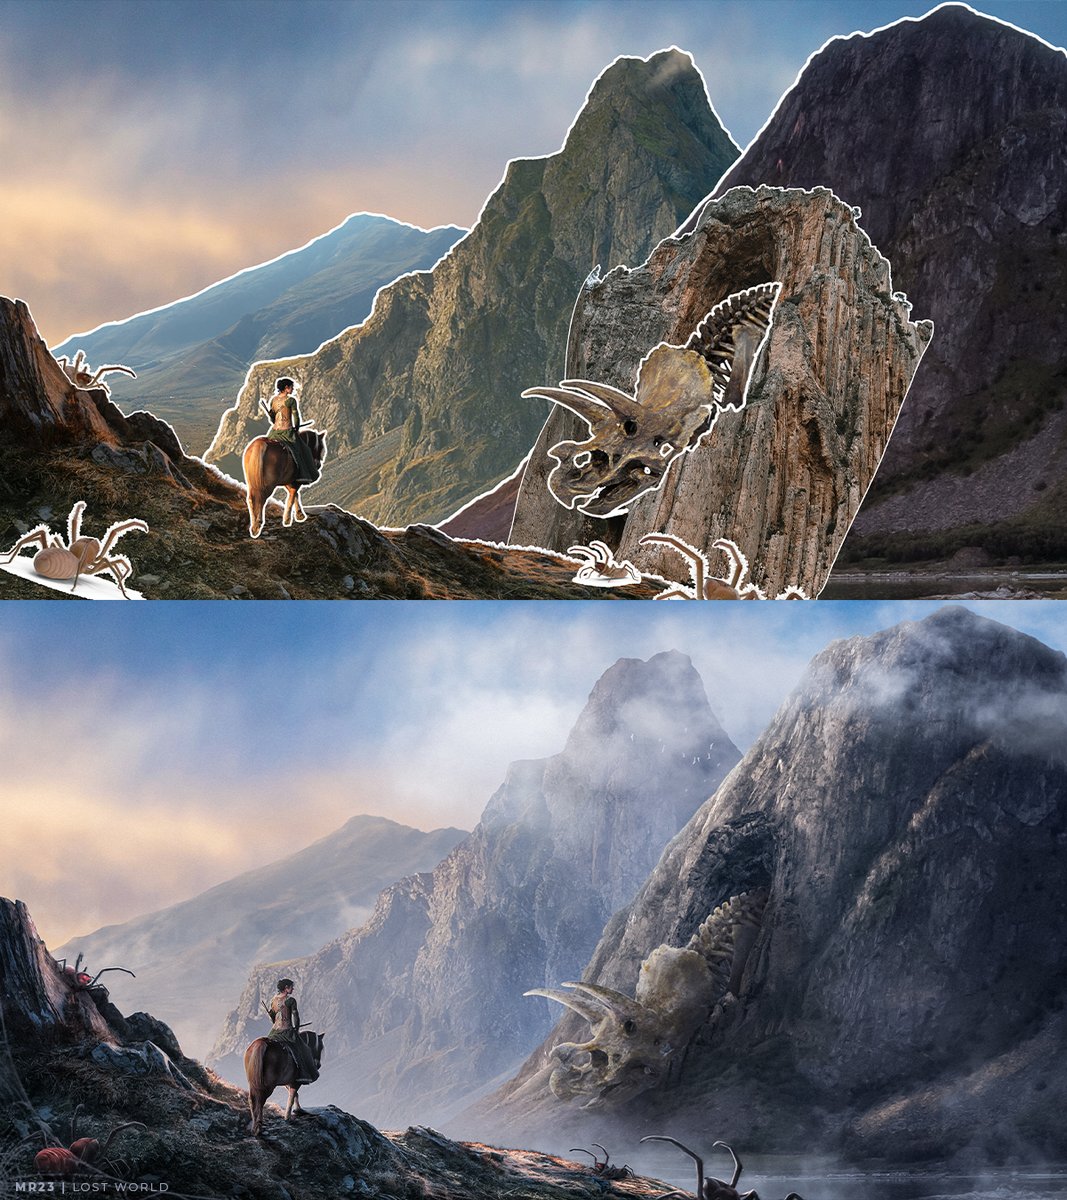 Lost world (before/after)

I created this using @Photoshop @envato @Xencelabs_emea